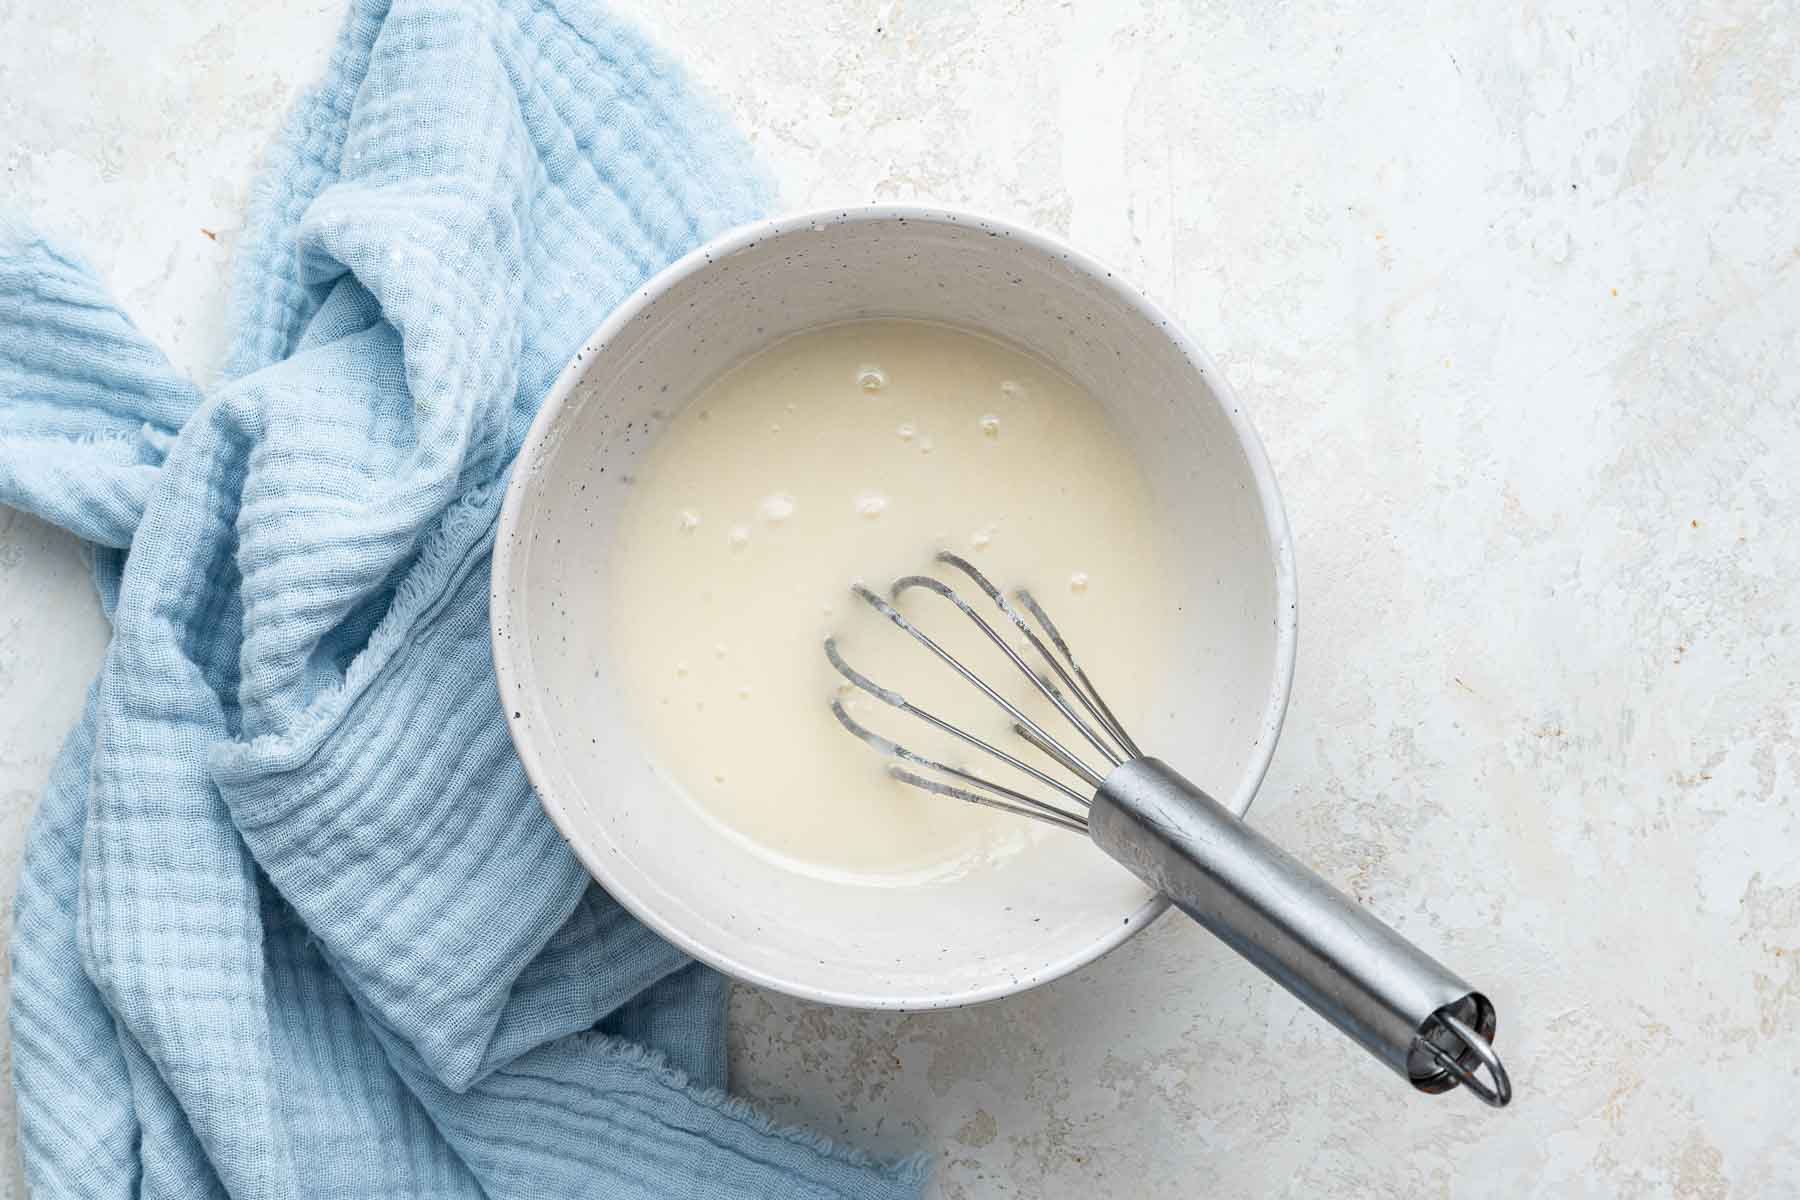 Lemon glaze in white bowl with whisk and blue kitchen towel on side.